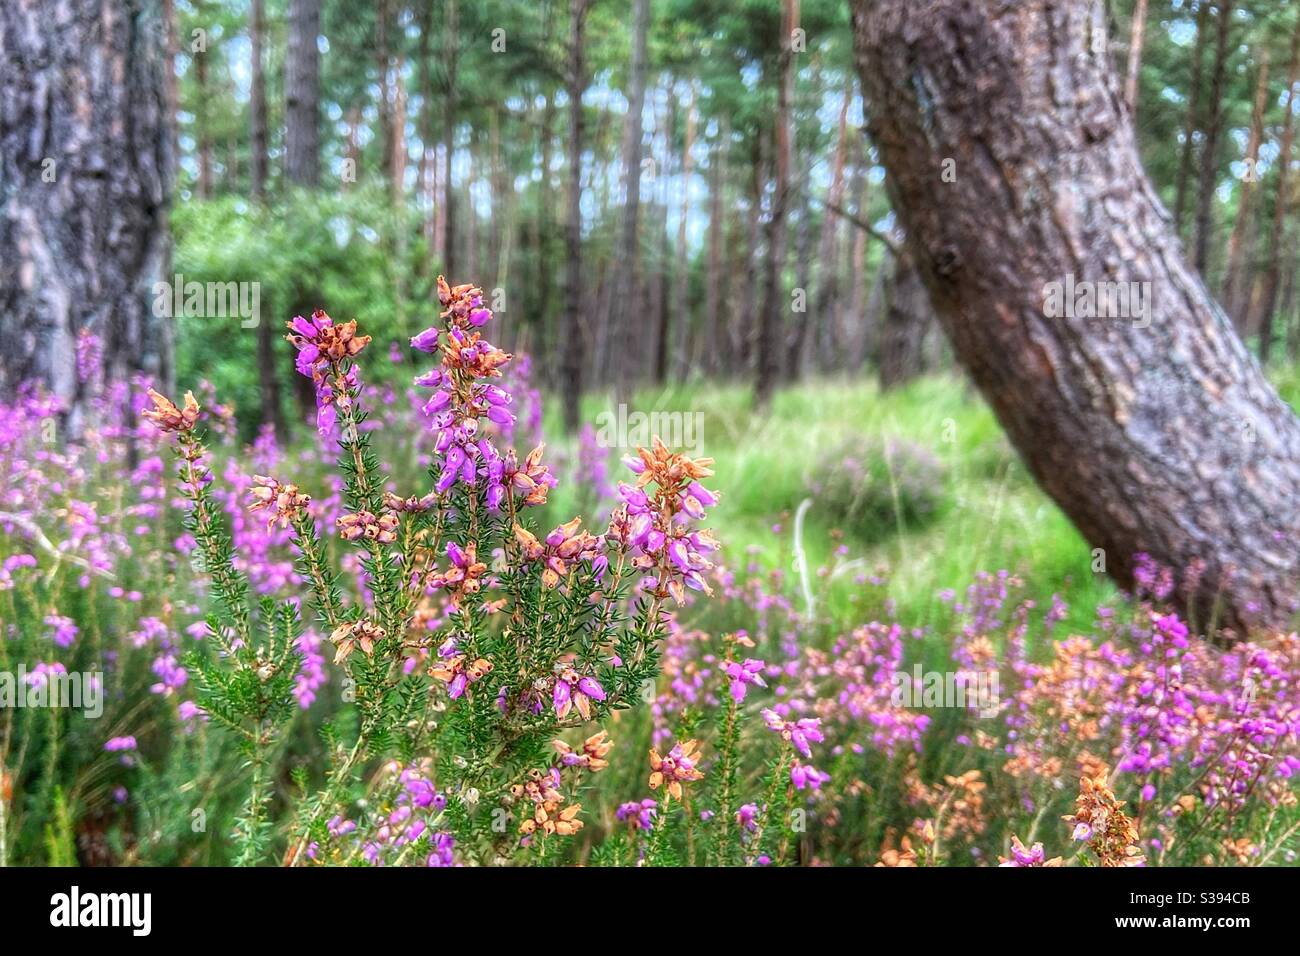 Heathers in foreground with out of focus tree trunks in background Stock Photo